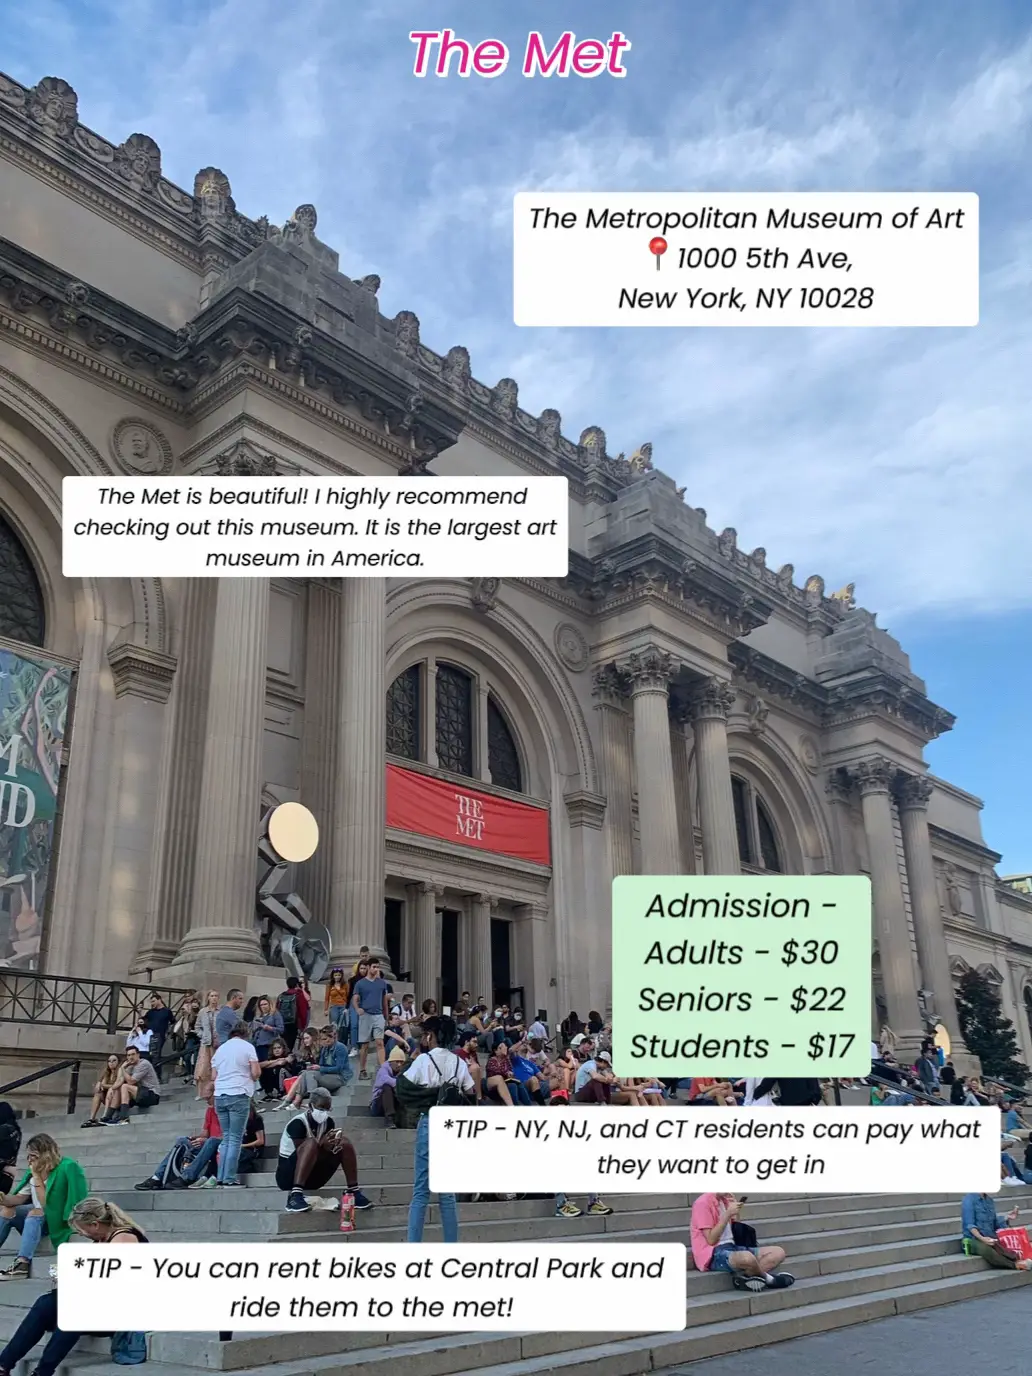  The Met is a large art museum in New York.